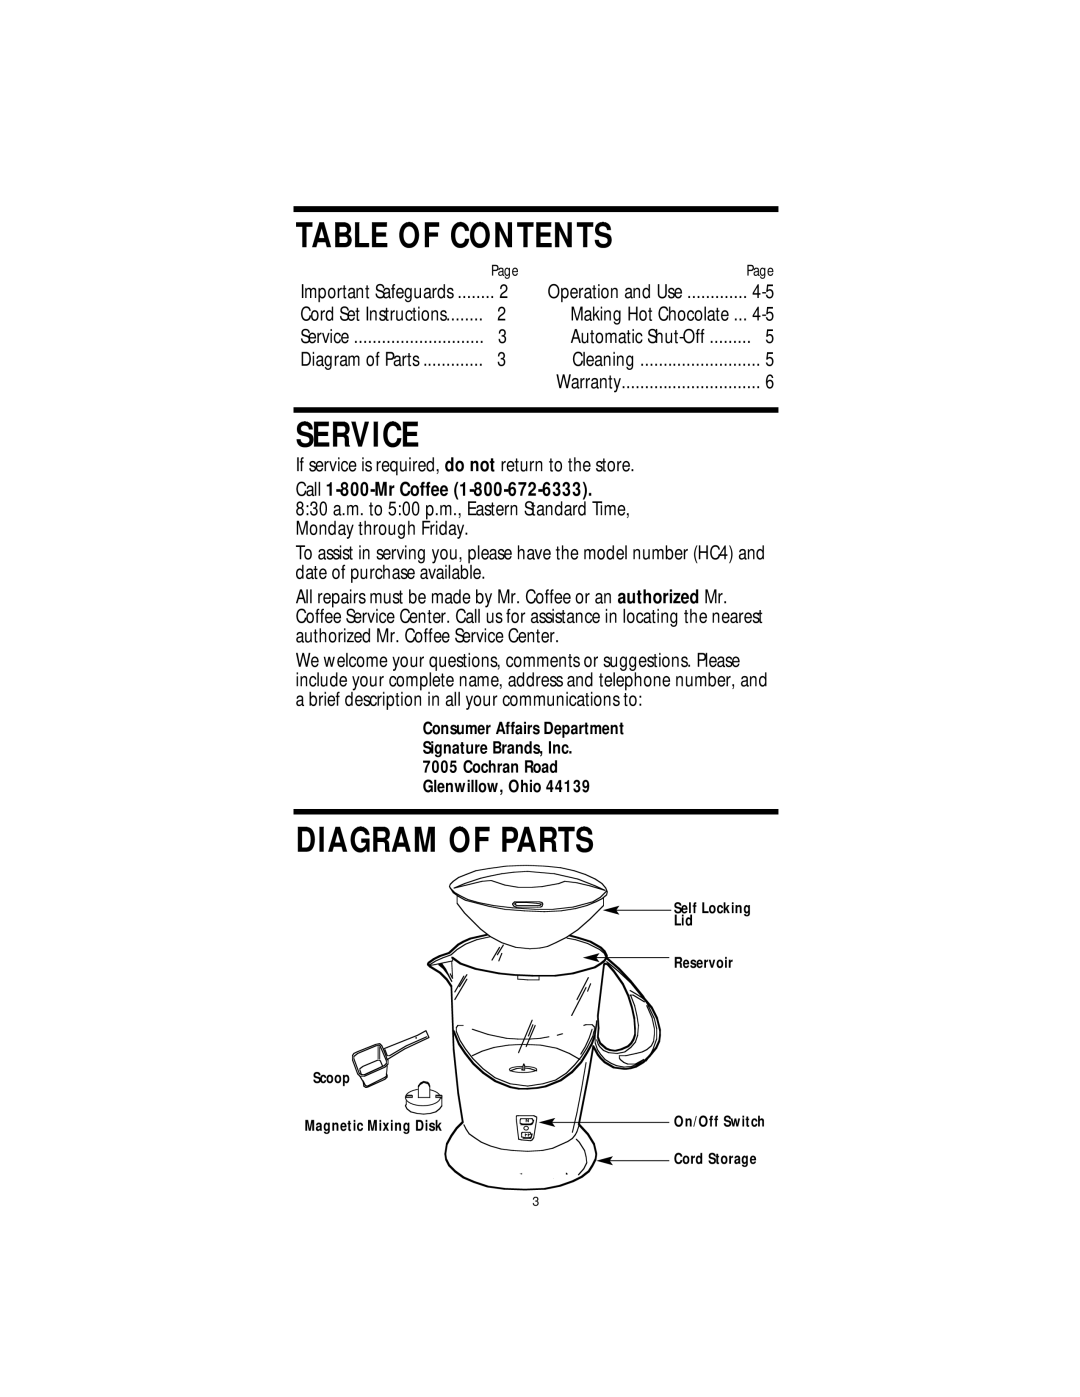 Mr. Coffee HC4 operating instructions Table Of Contents, Service, Diagram Of Parts 